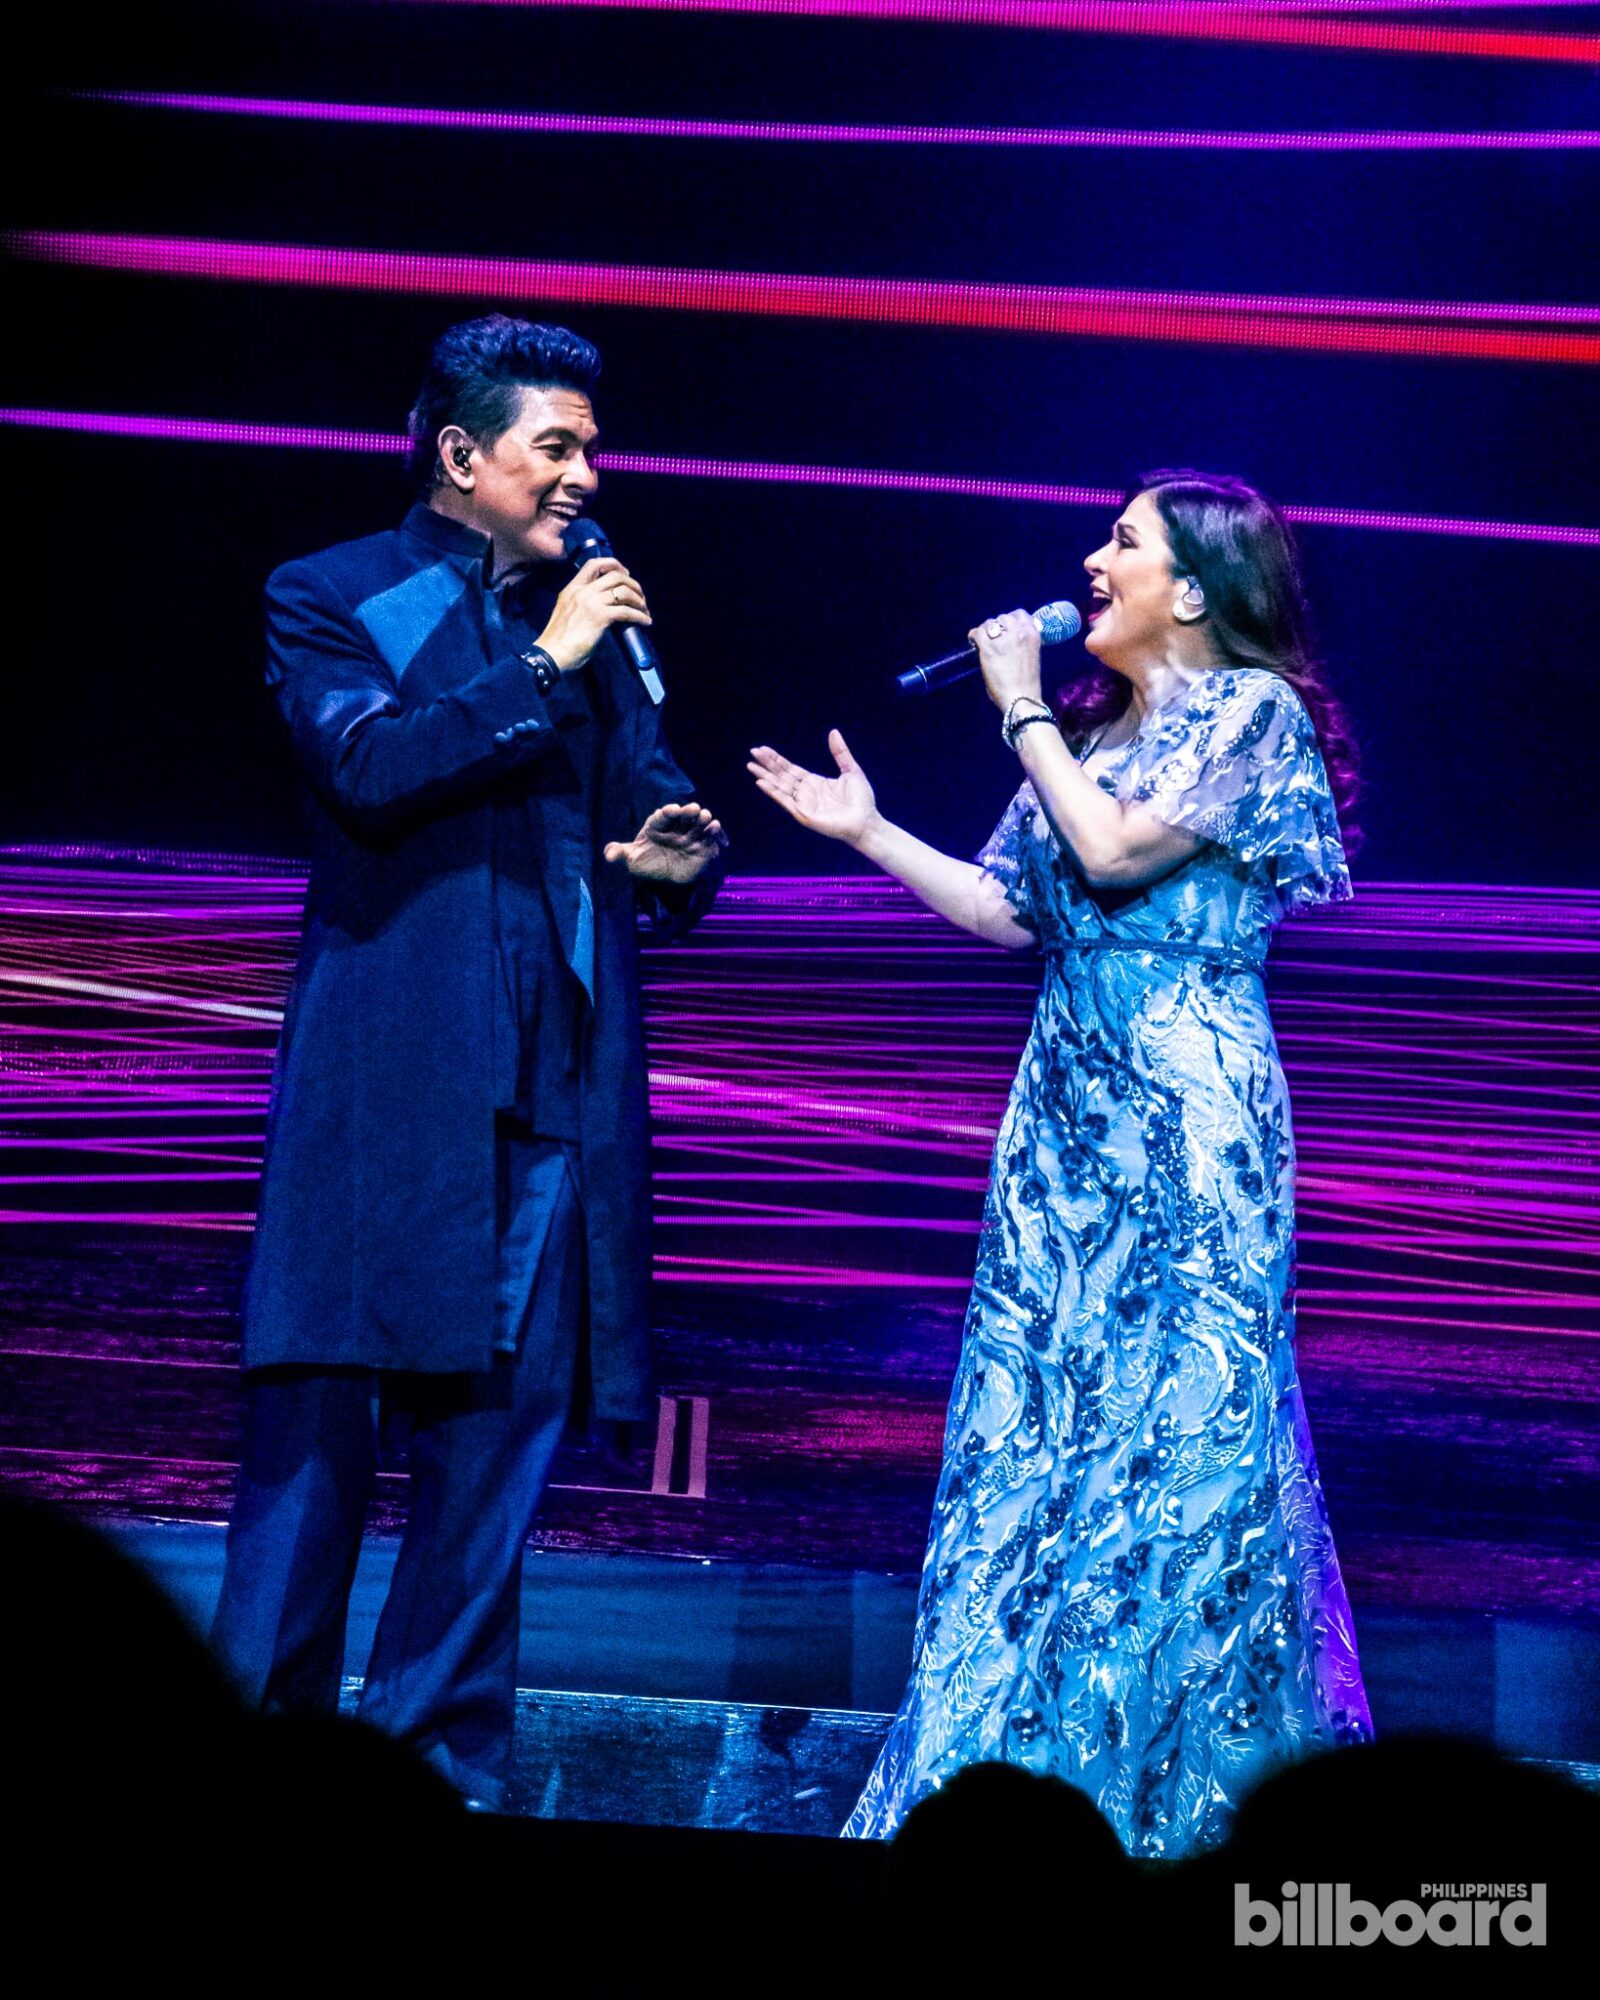 Gary Valenciano with special guest Zsa Zsa Padilla performing at his 40th Anniversary Concert 'Pure Energy'